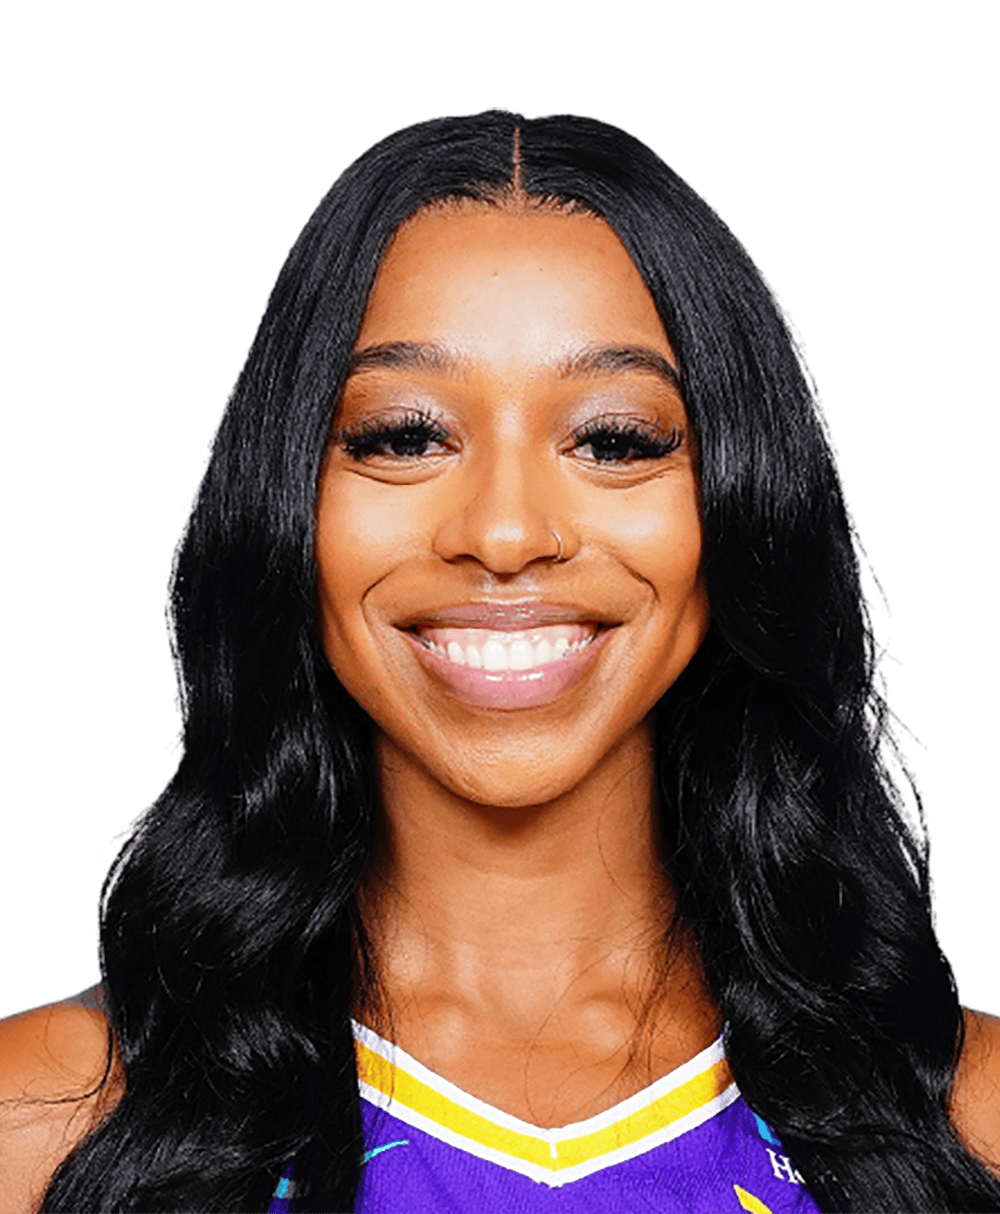 Athletes Unlimited has 11 WNBA players on basketball roster